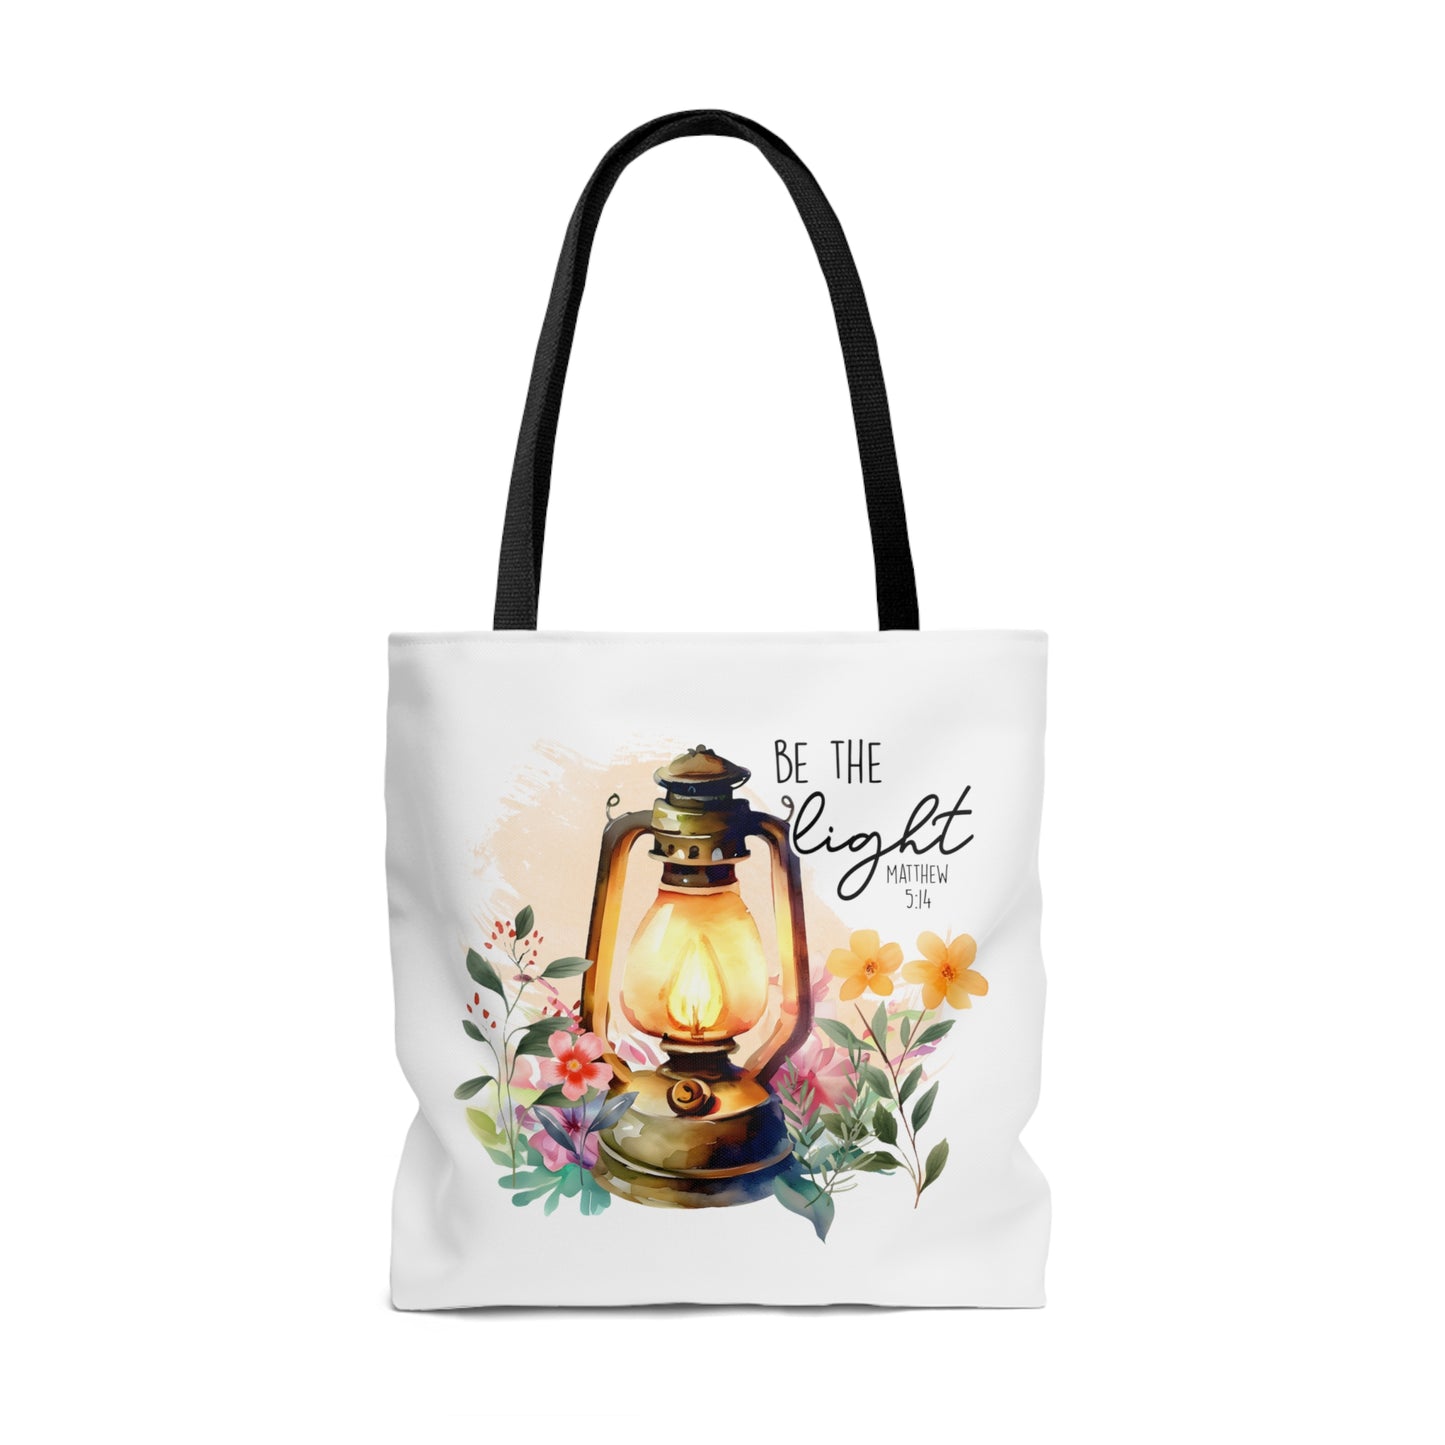 Be the Light Tote Bag, Christian Gifts